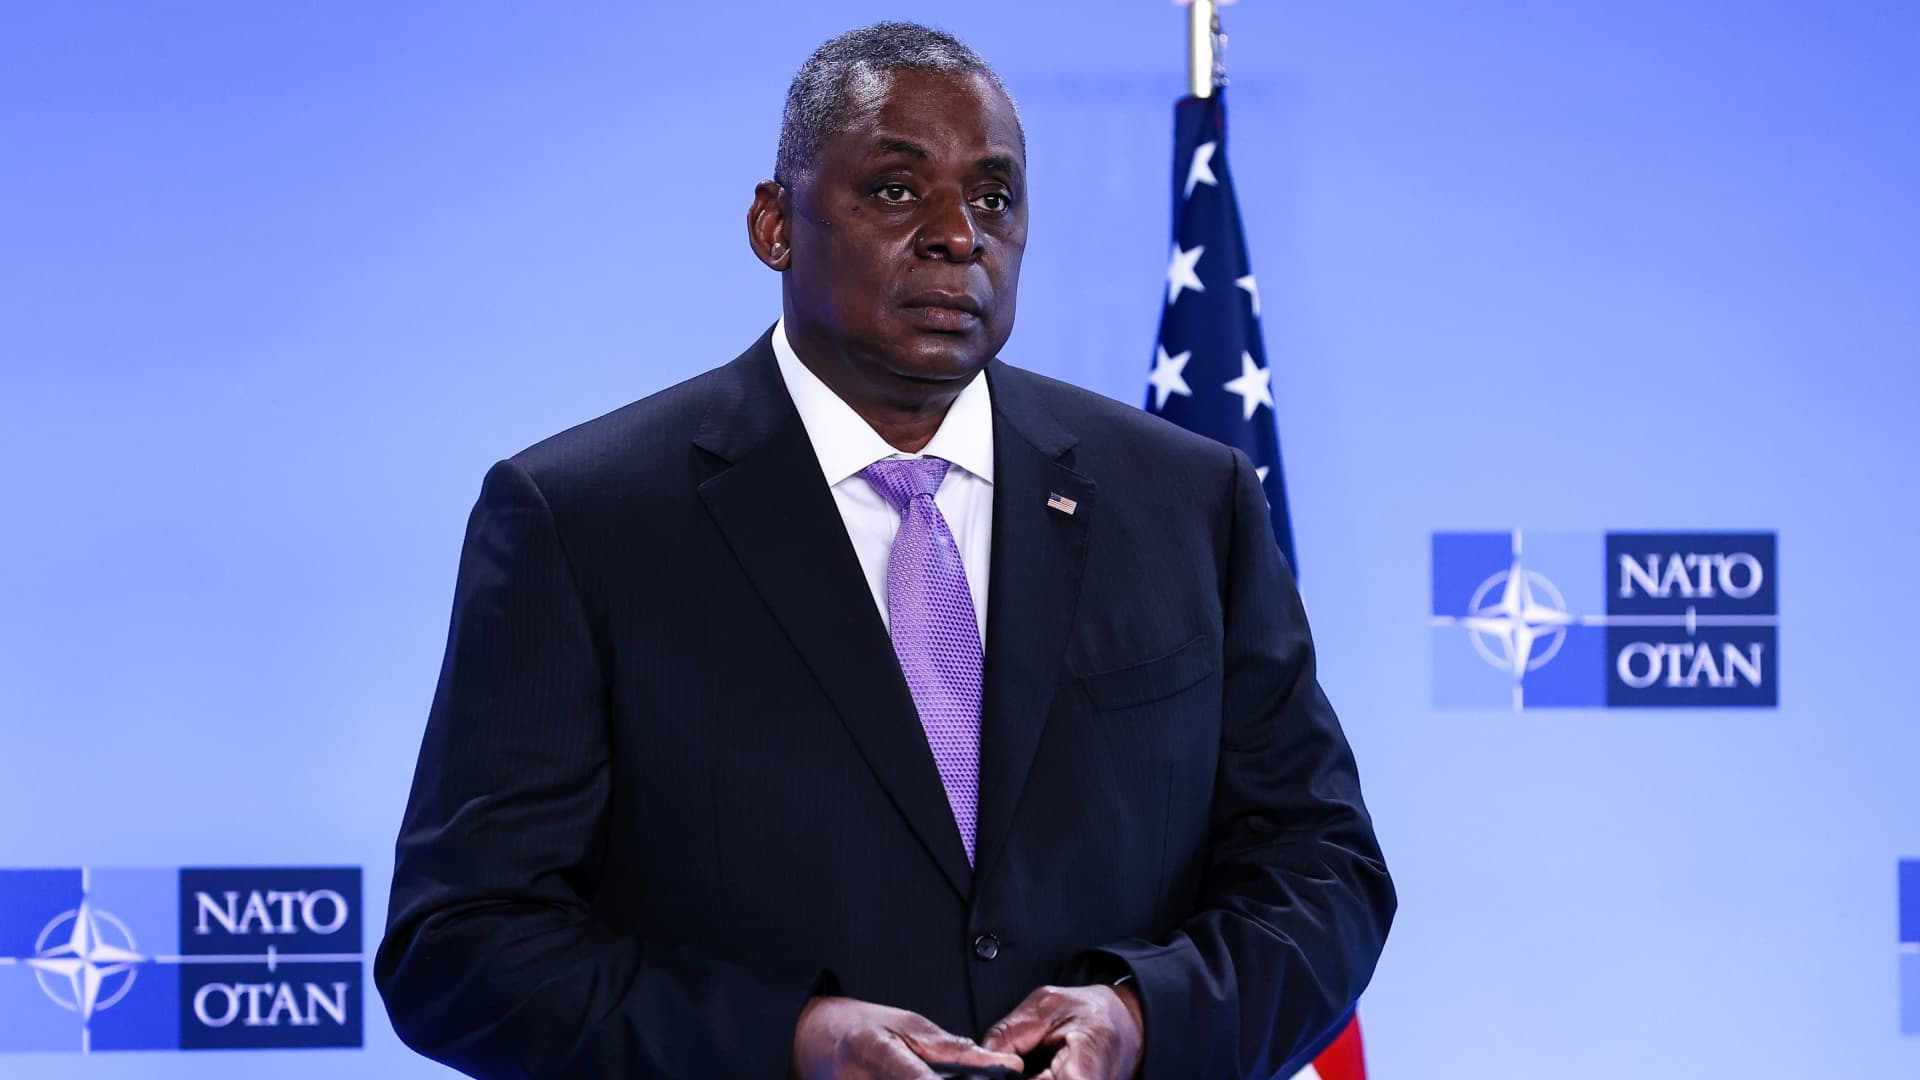 U.S. Defence Secretary Lloyd Austin looks on as he arrives for a meeting of foreign ministers of the U.S., Britain, France and Germany on Afghanistan at NATO's headquarters in Brussels, Belgium, April 14, 2021.